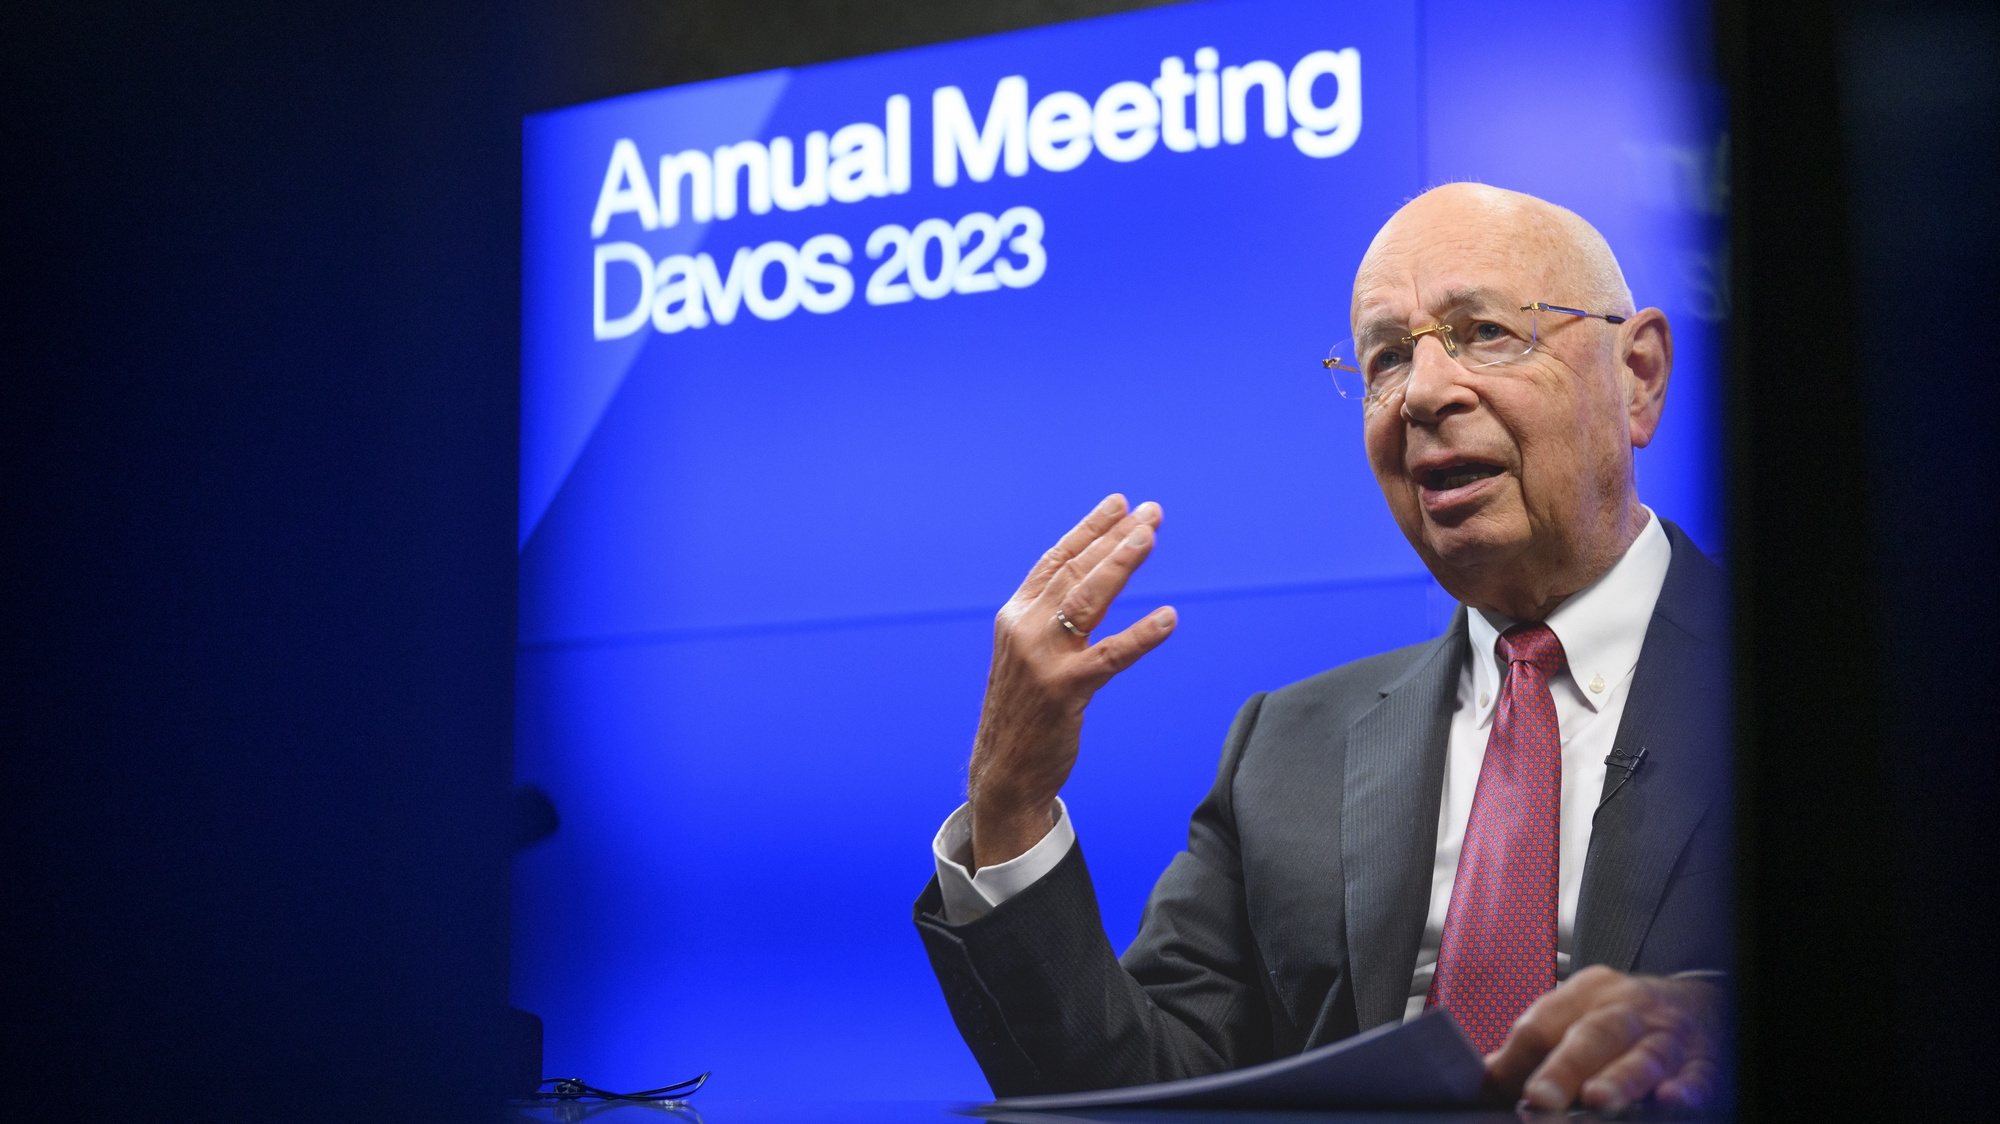 epa10398043 Klaus Schwab, Founder and Executive Chairman of the World Economic Forum (WEF), practices his speech before a virtual media briefing, in Cologny, near Geneva, Switzerland, 10 January 2023. The World Economic Forum unveiled the program for its upcomming Annual Meeting Davos 2023, Switzerland, including the key participants, themes and goals. The WEF 2023 will take place from 16 to 20 January.  EPA/LAURENT GILLIERON